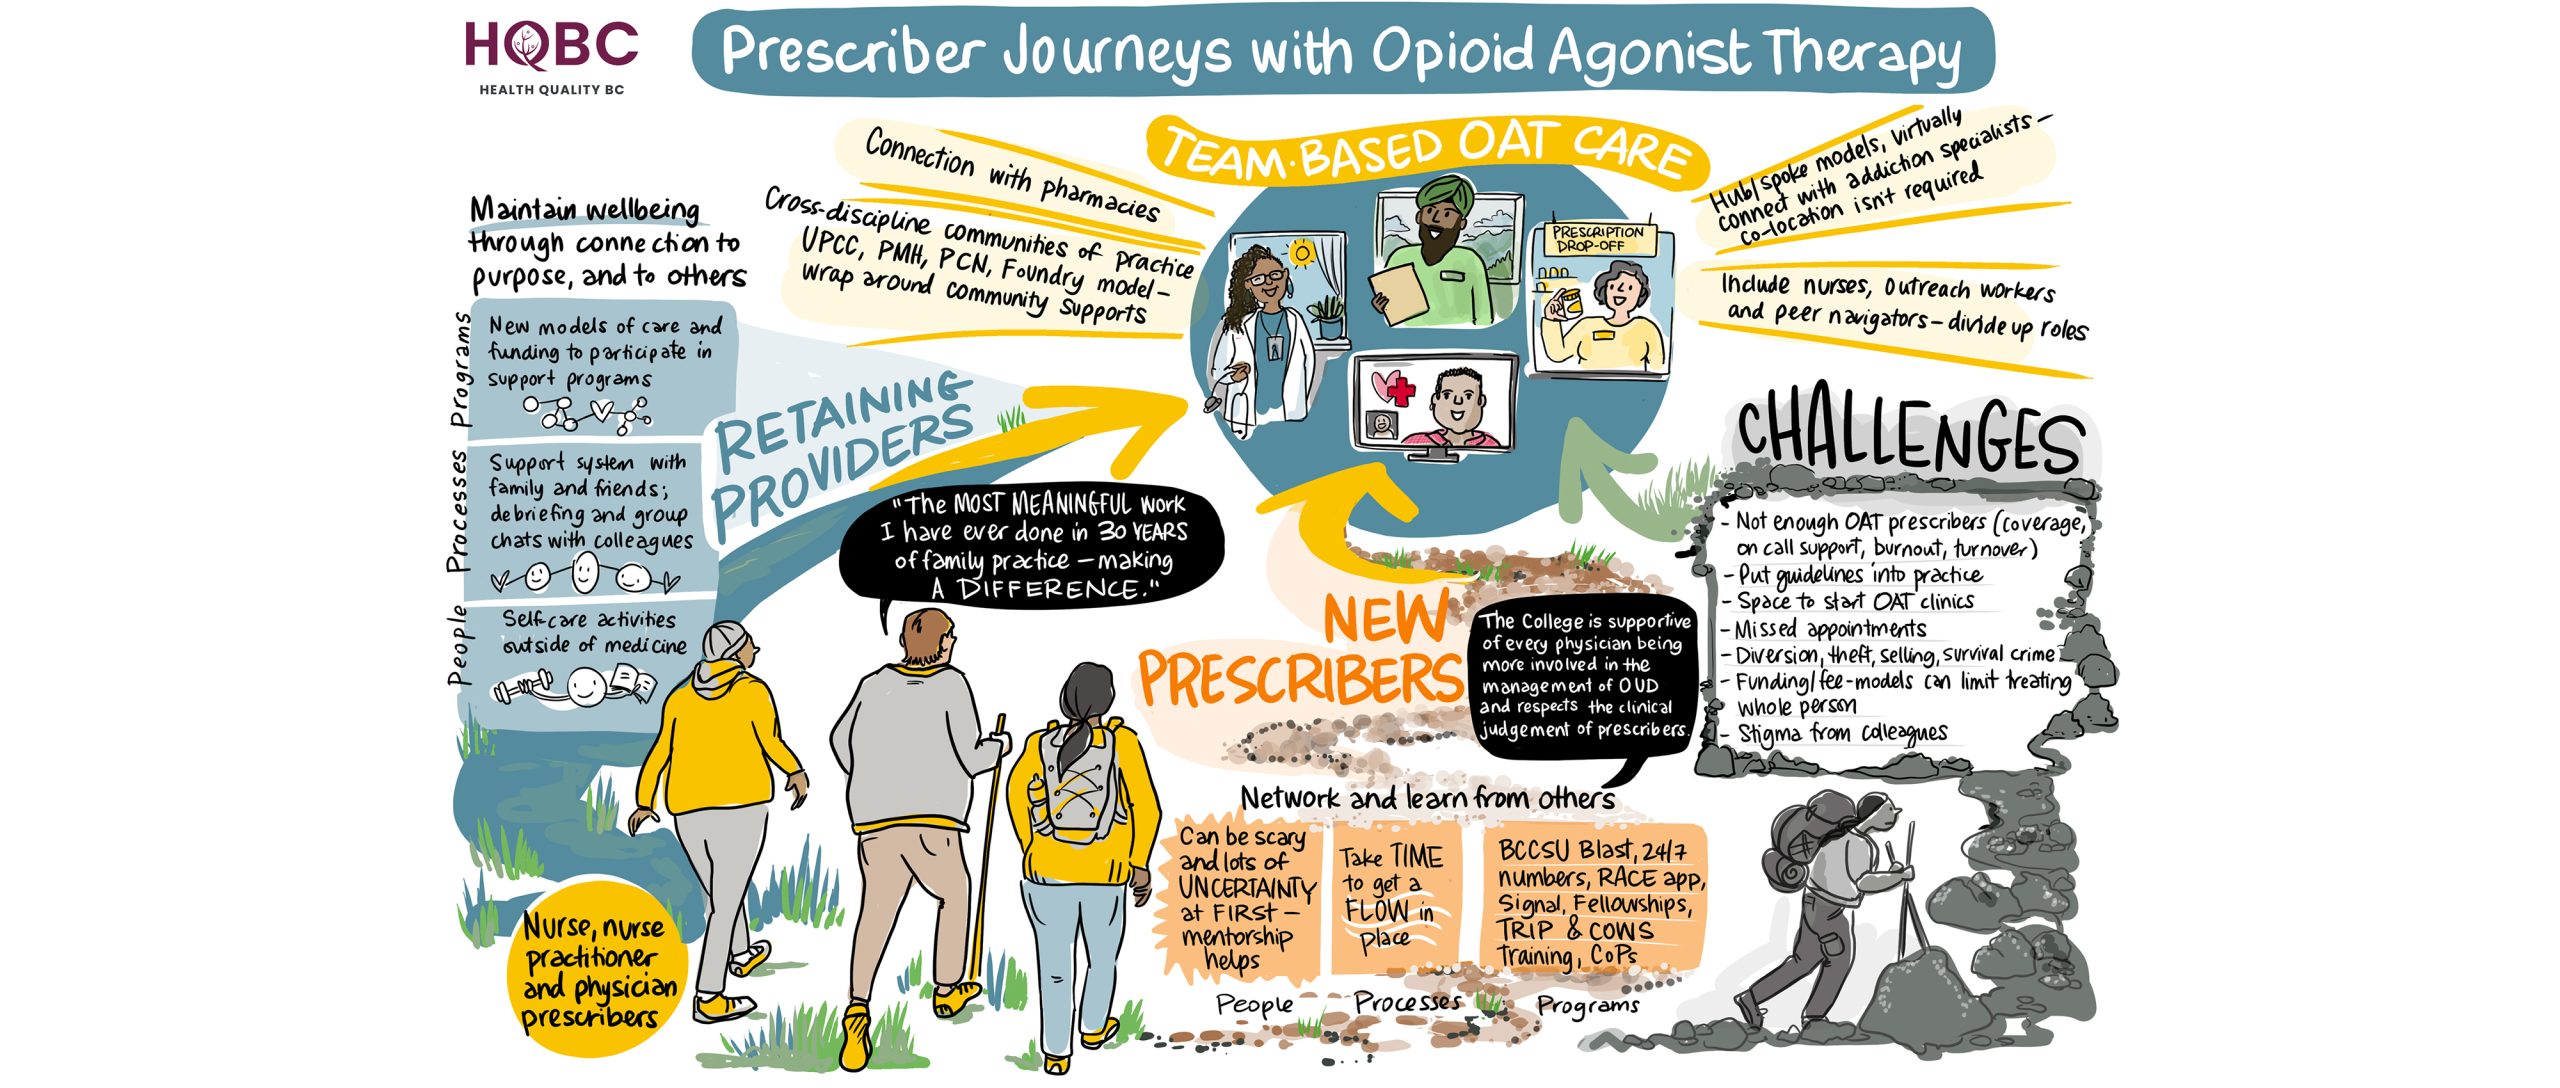 illustrated journey map about accessing and delivering opioid agonist treatment (OAT) in BC, illustrated by drawing change sam bradd - provider experiences